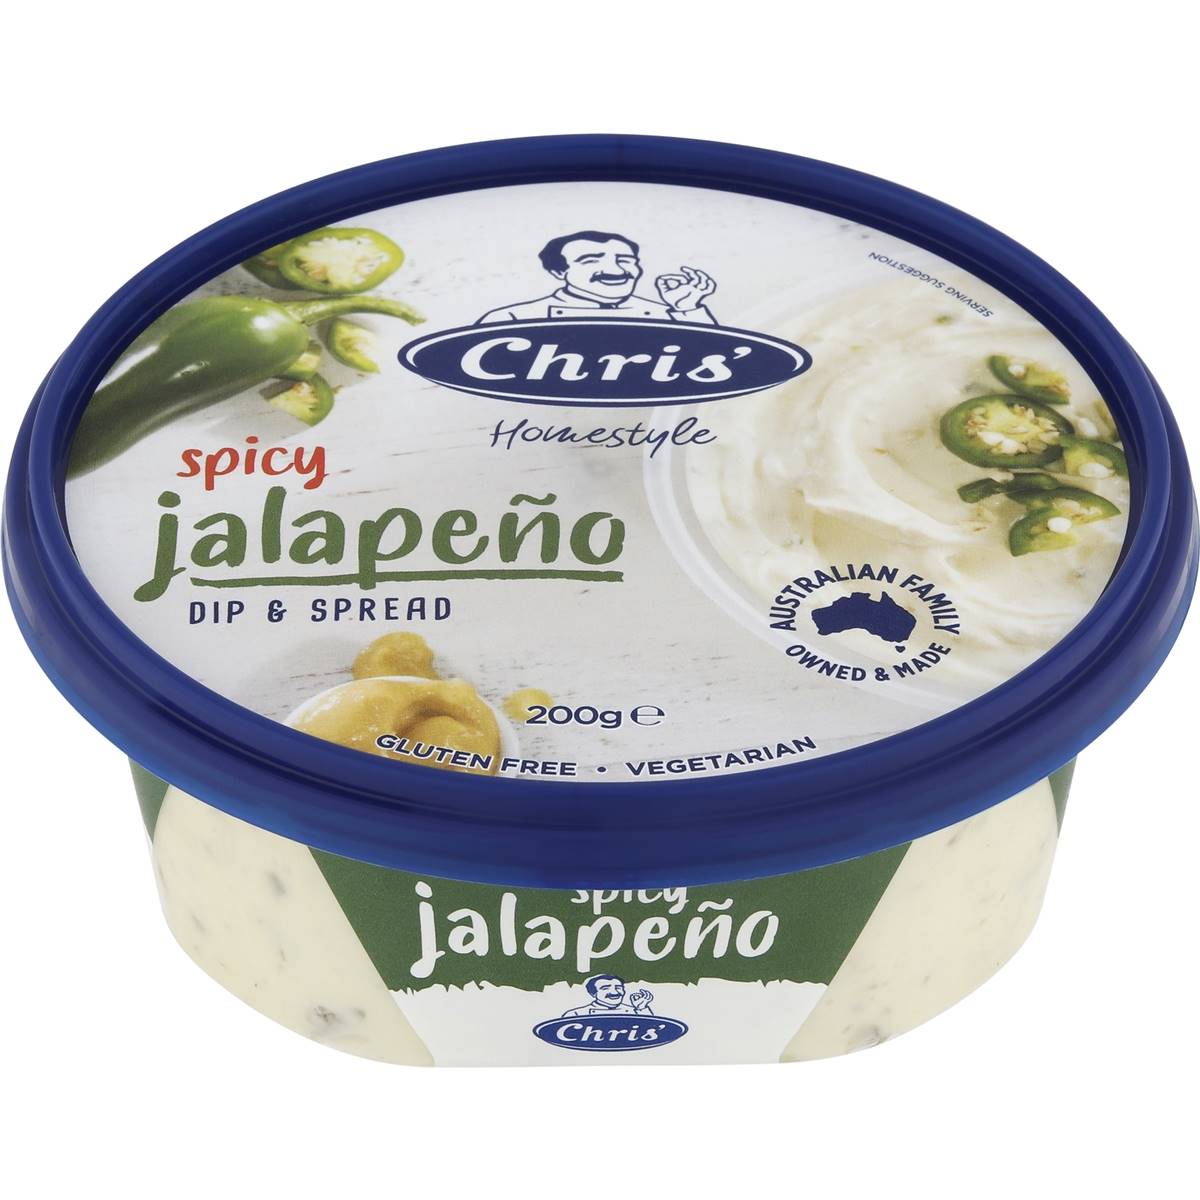 Calories in Chris' Spicy Jalapeno Dip & Spread